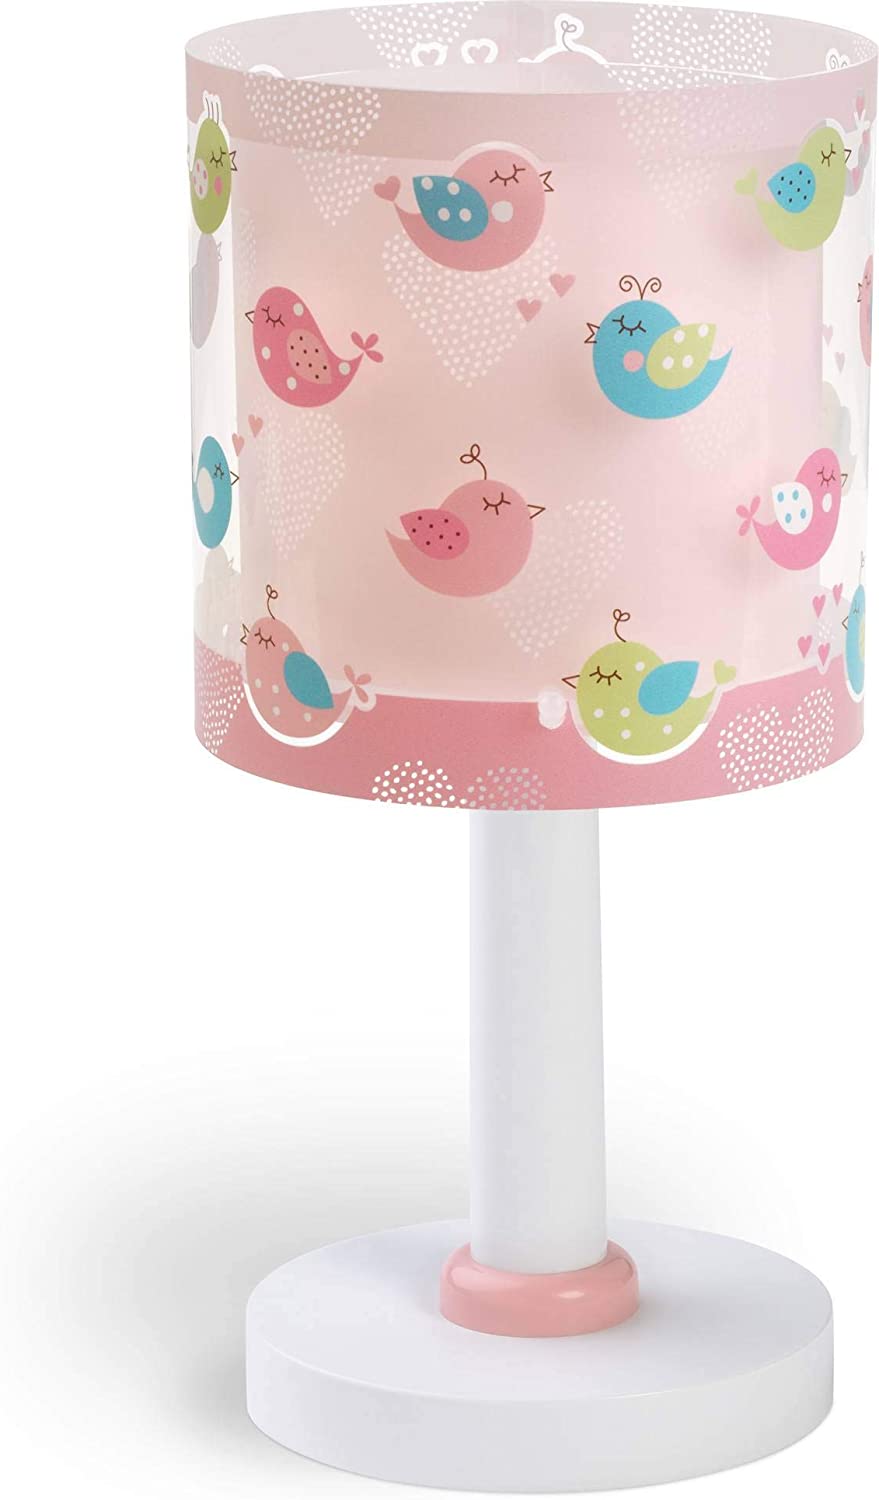 Dalber 60291 Bird and Heart Table Lamp, Plastic, Pink, 15 x 15 x 30 cm